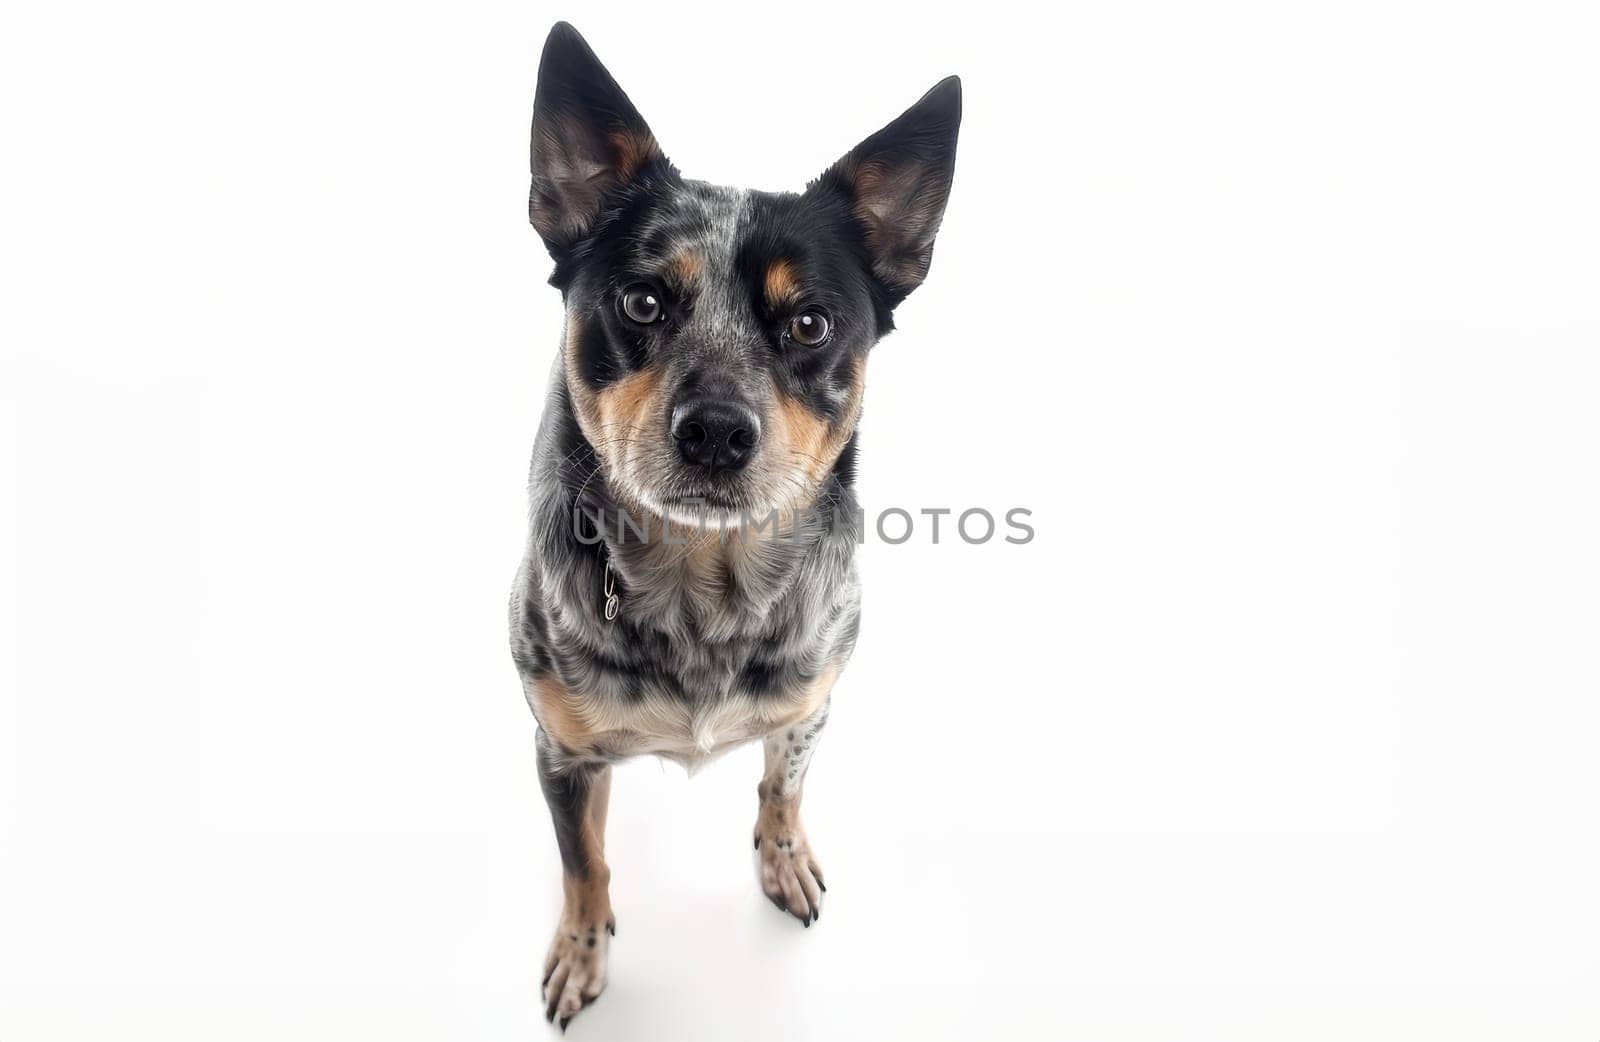 A direct front view of an Australian Cattle Dog with a sharp, inquisitive look. Its compact stature and mottled coat are clearly visible against the white backdrop. by sfinks